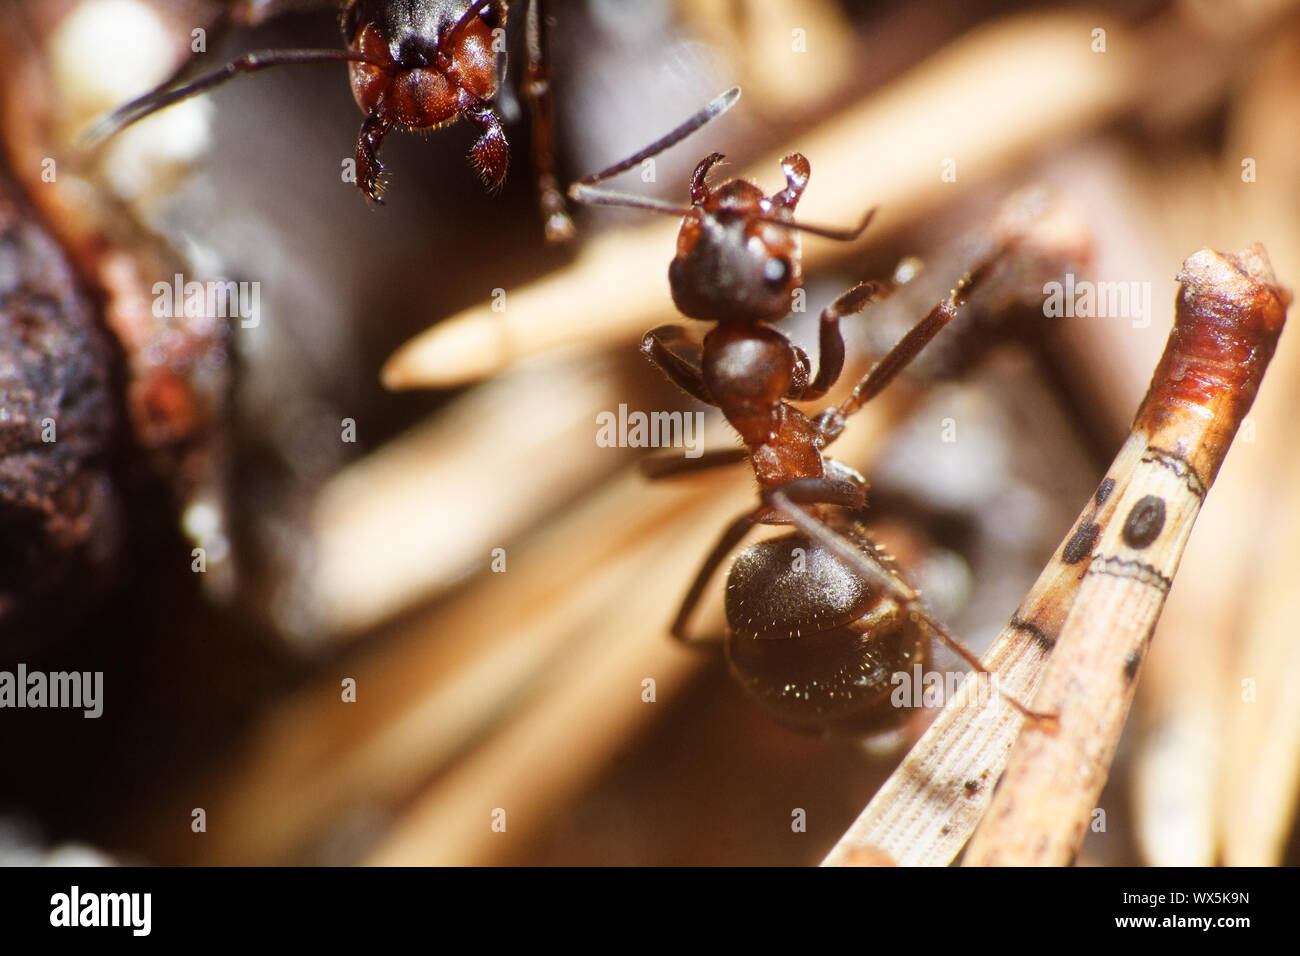 one insect, the ant portrait Stock Photo